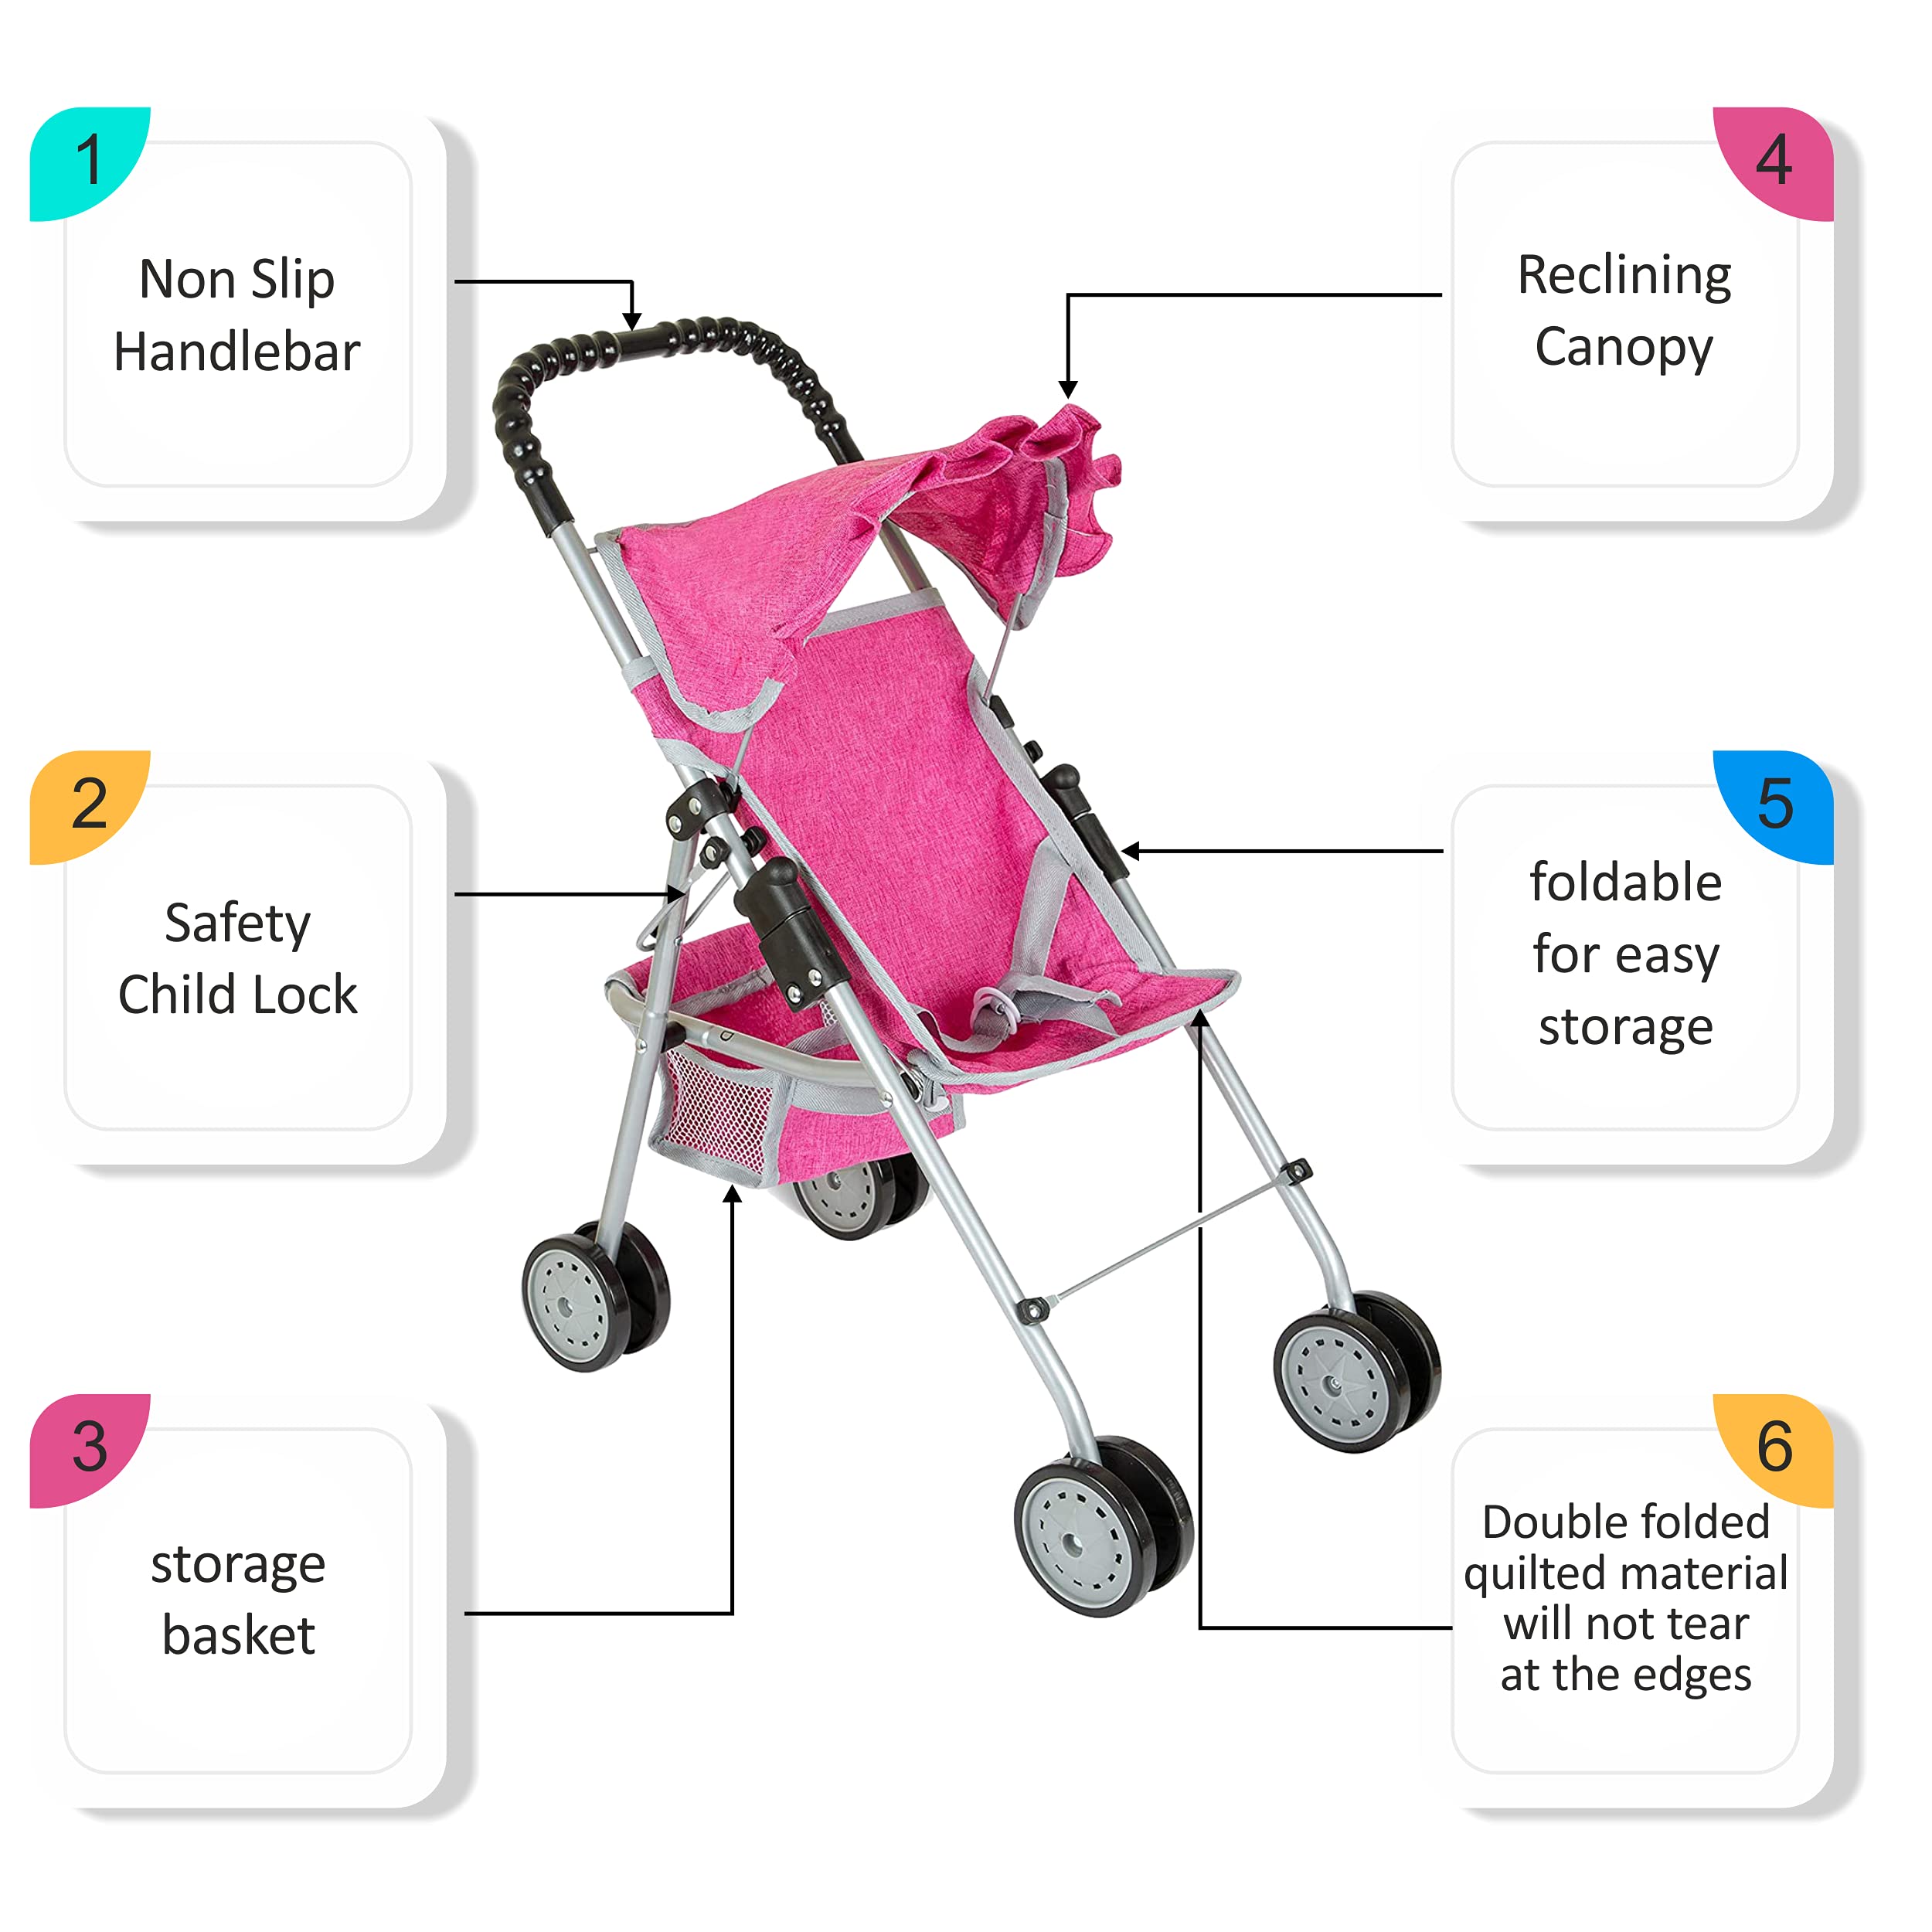 Fash N Kolor Doll Play Set 3 in 1 Doll Set, 1 Pack N Play, Doll Stroller, Doll High Chair Fits Up to 18'' Doll Denim Pink